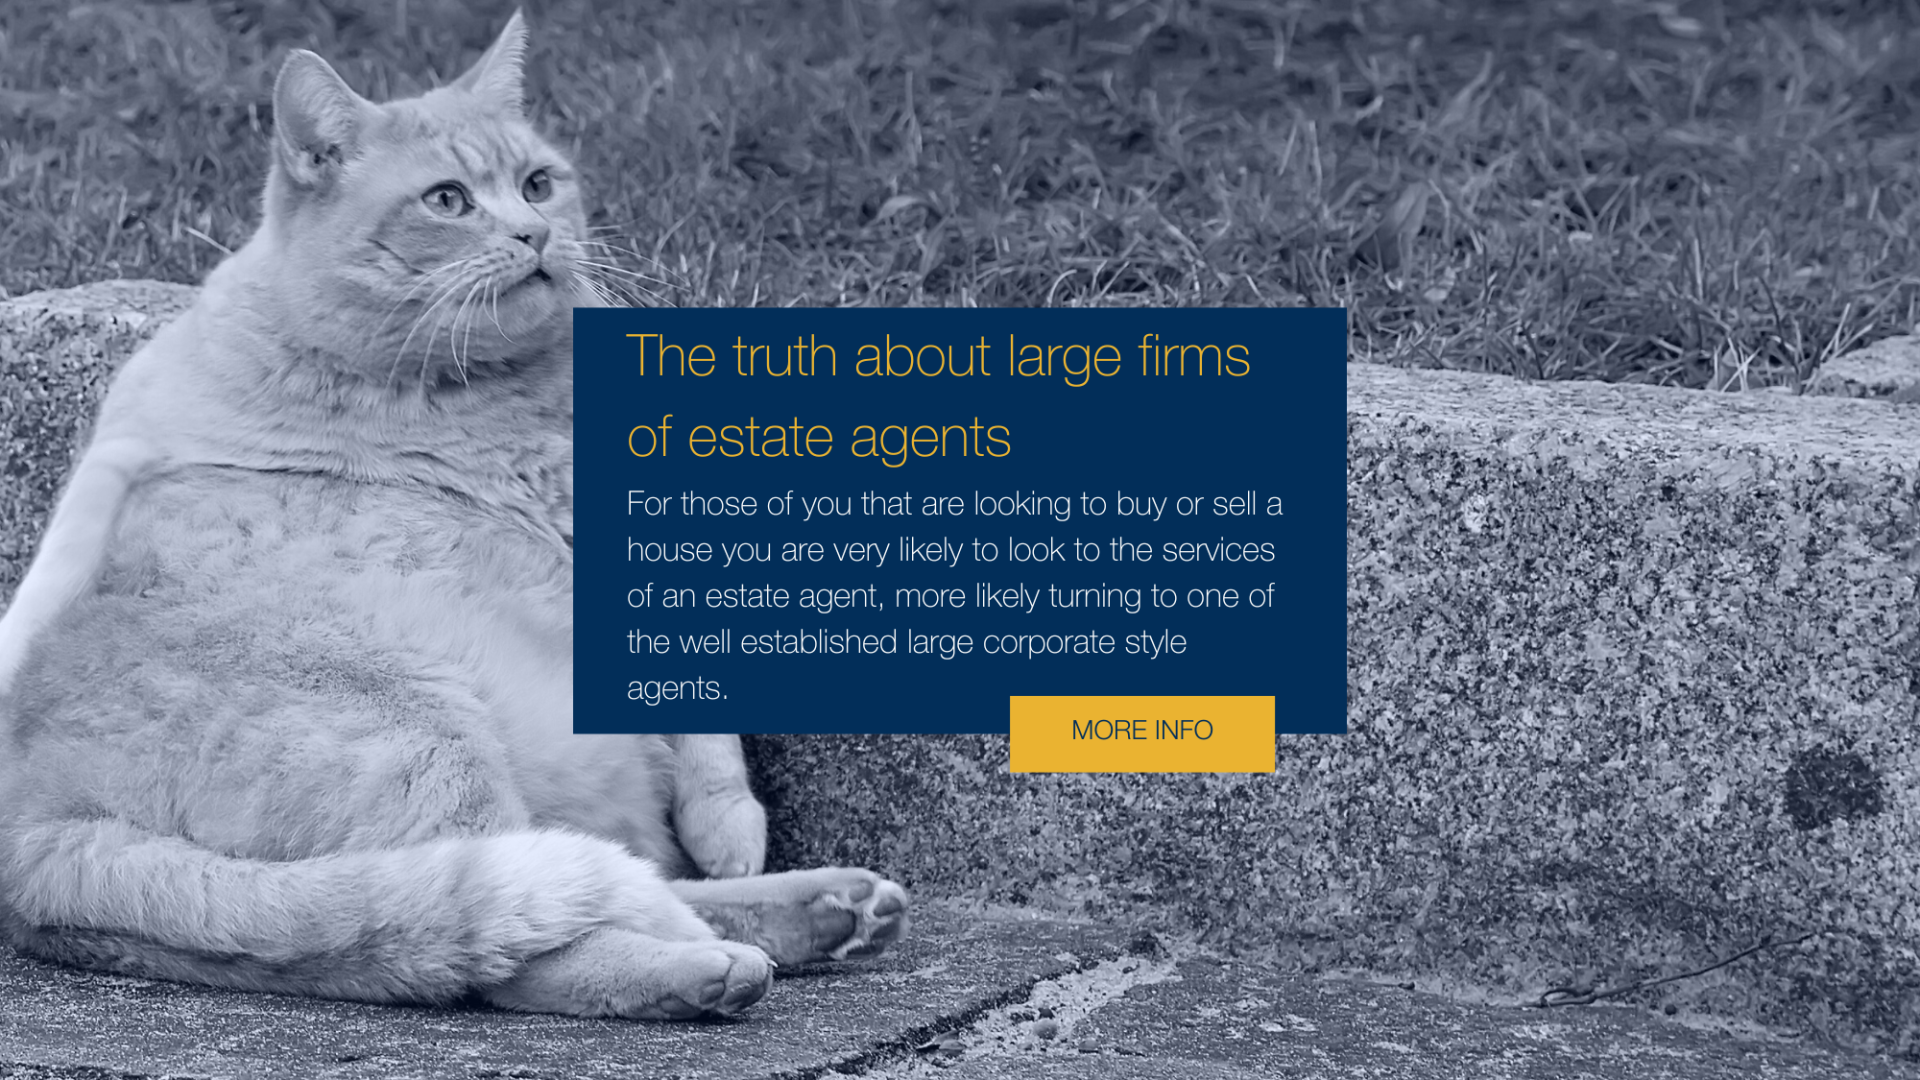 The truth about large firm...